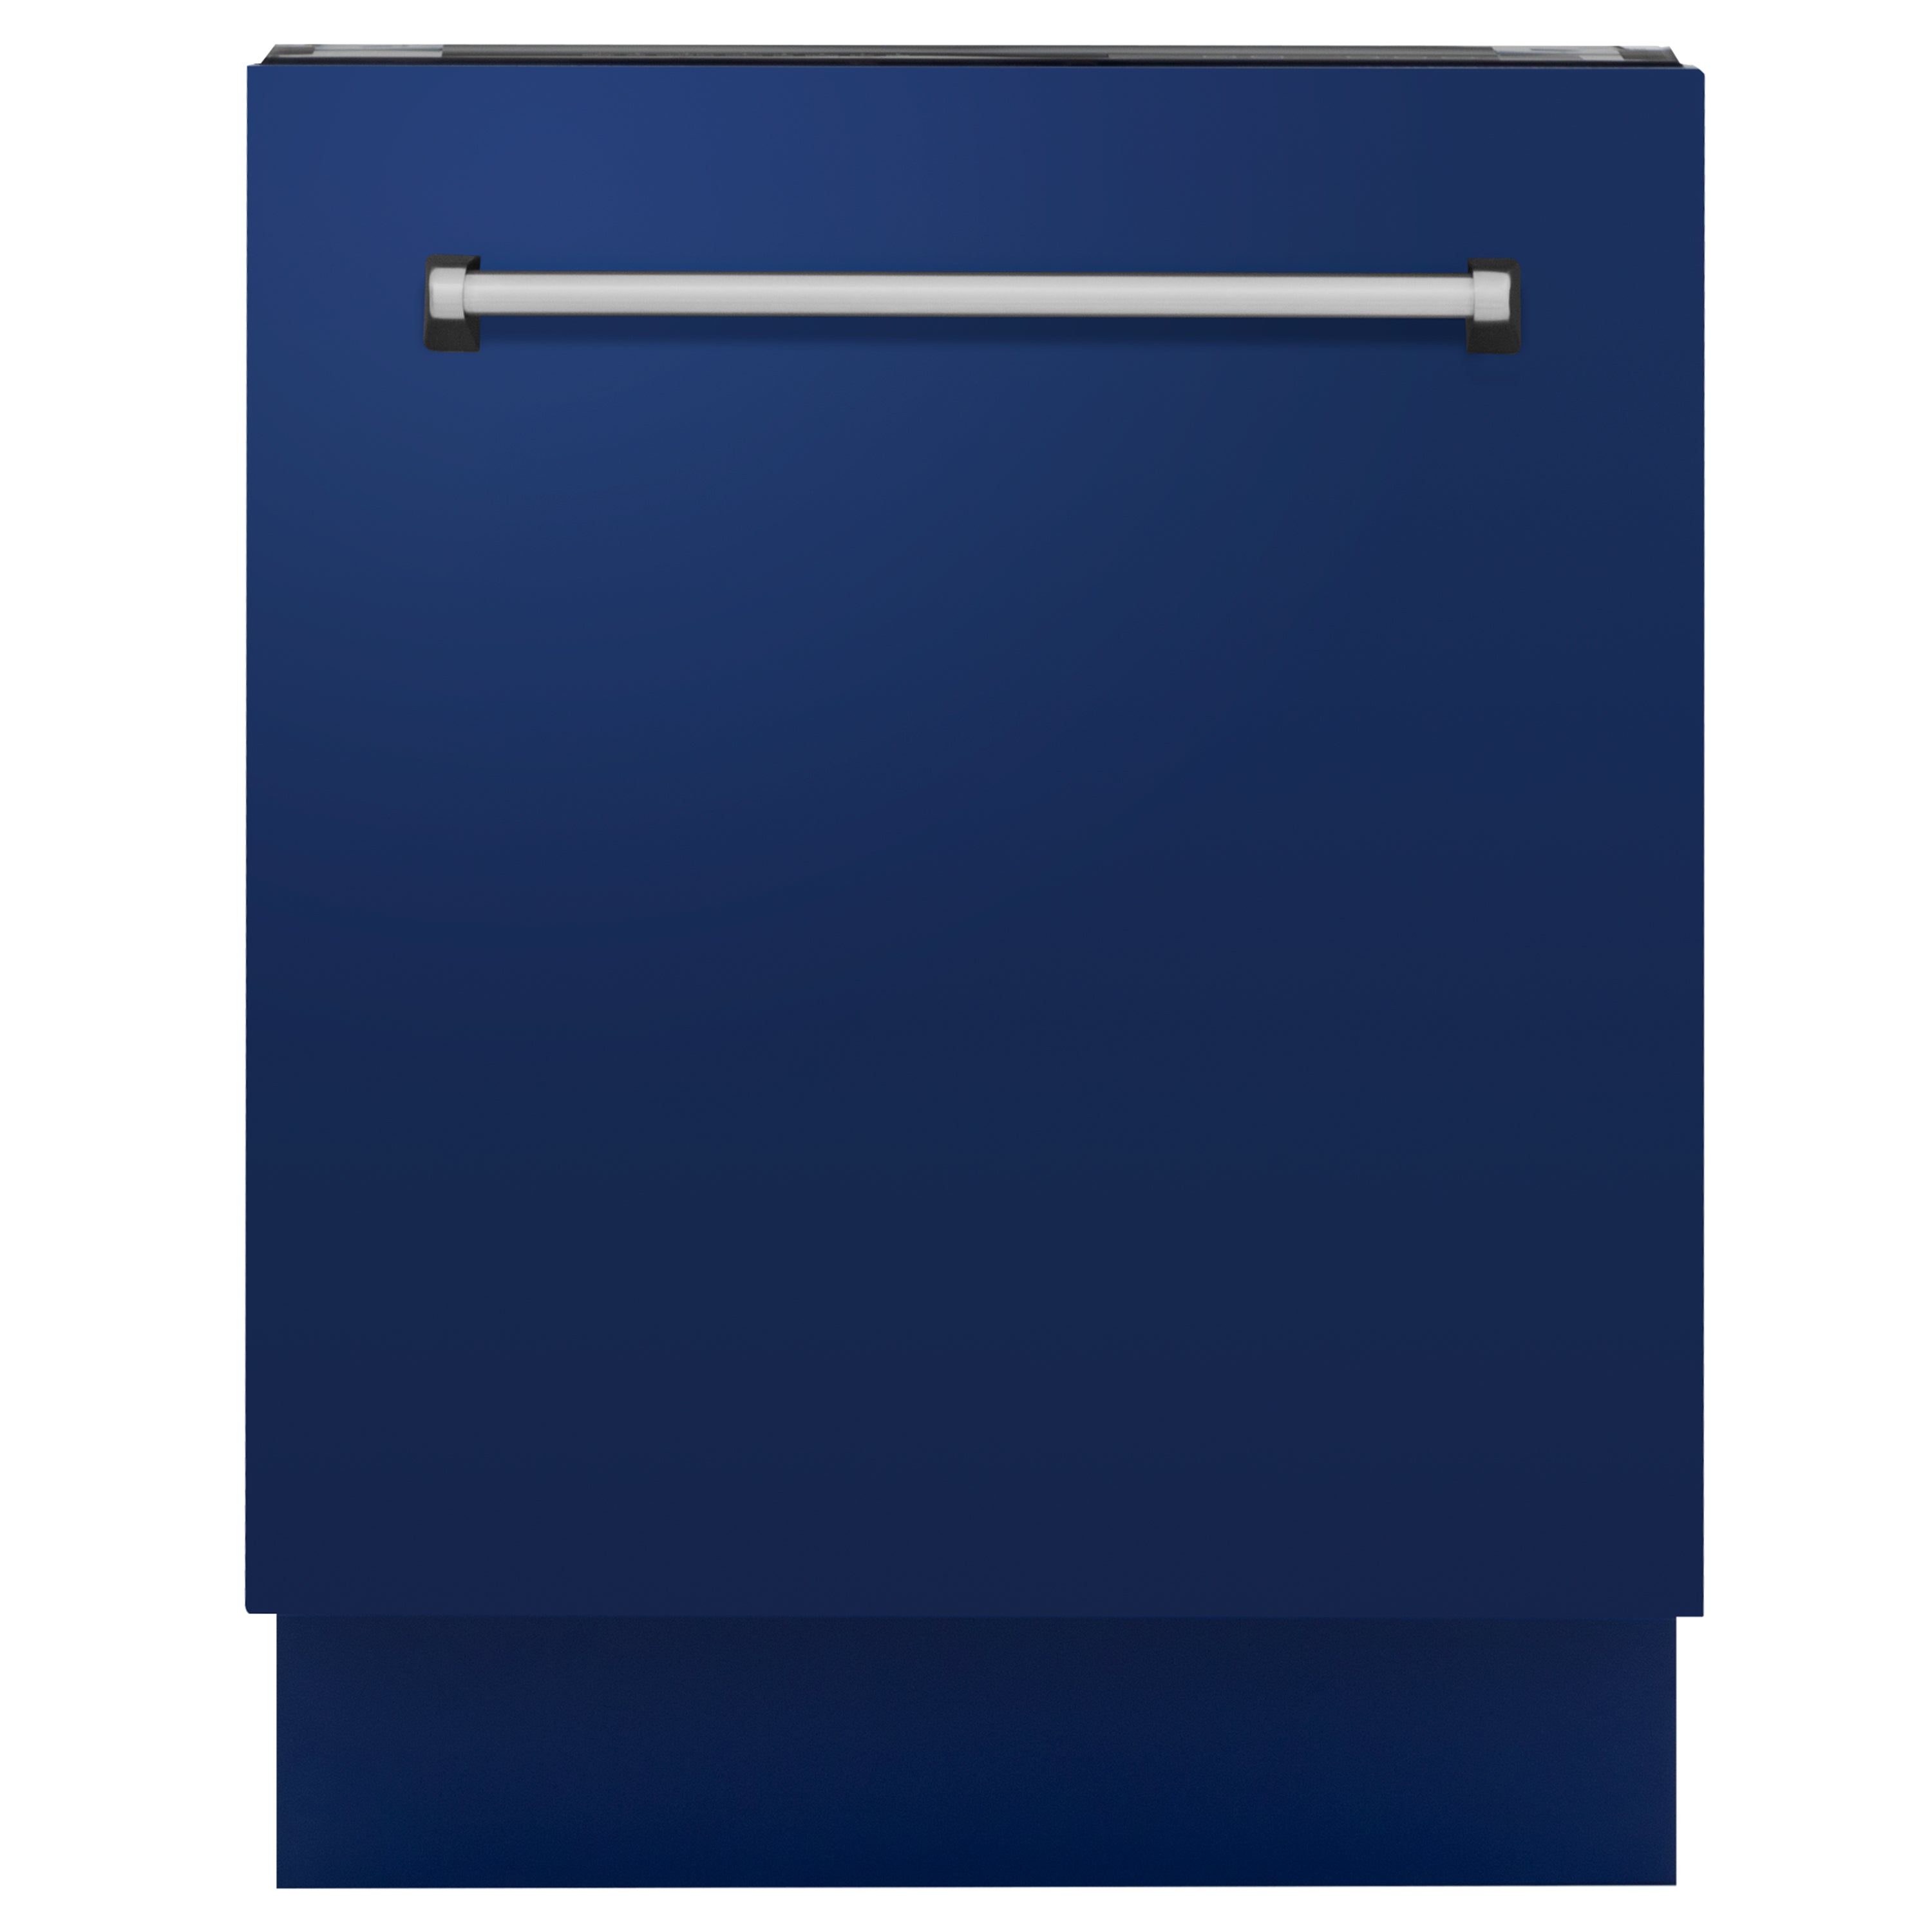 ZLINE 24" Tallac Series 3rd Rack Dishwasher with Traditional Handle, 51dBa (DWV-24) - New Star Living